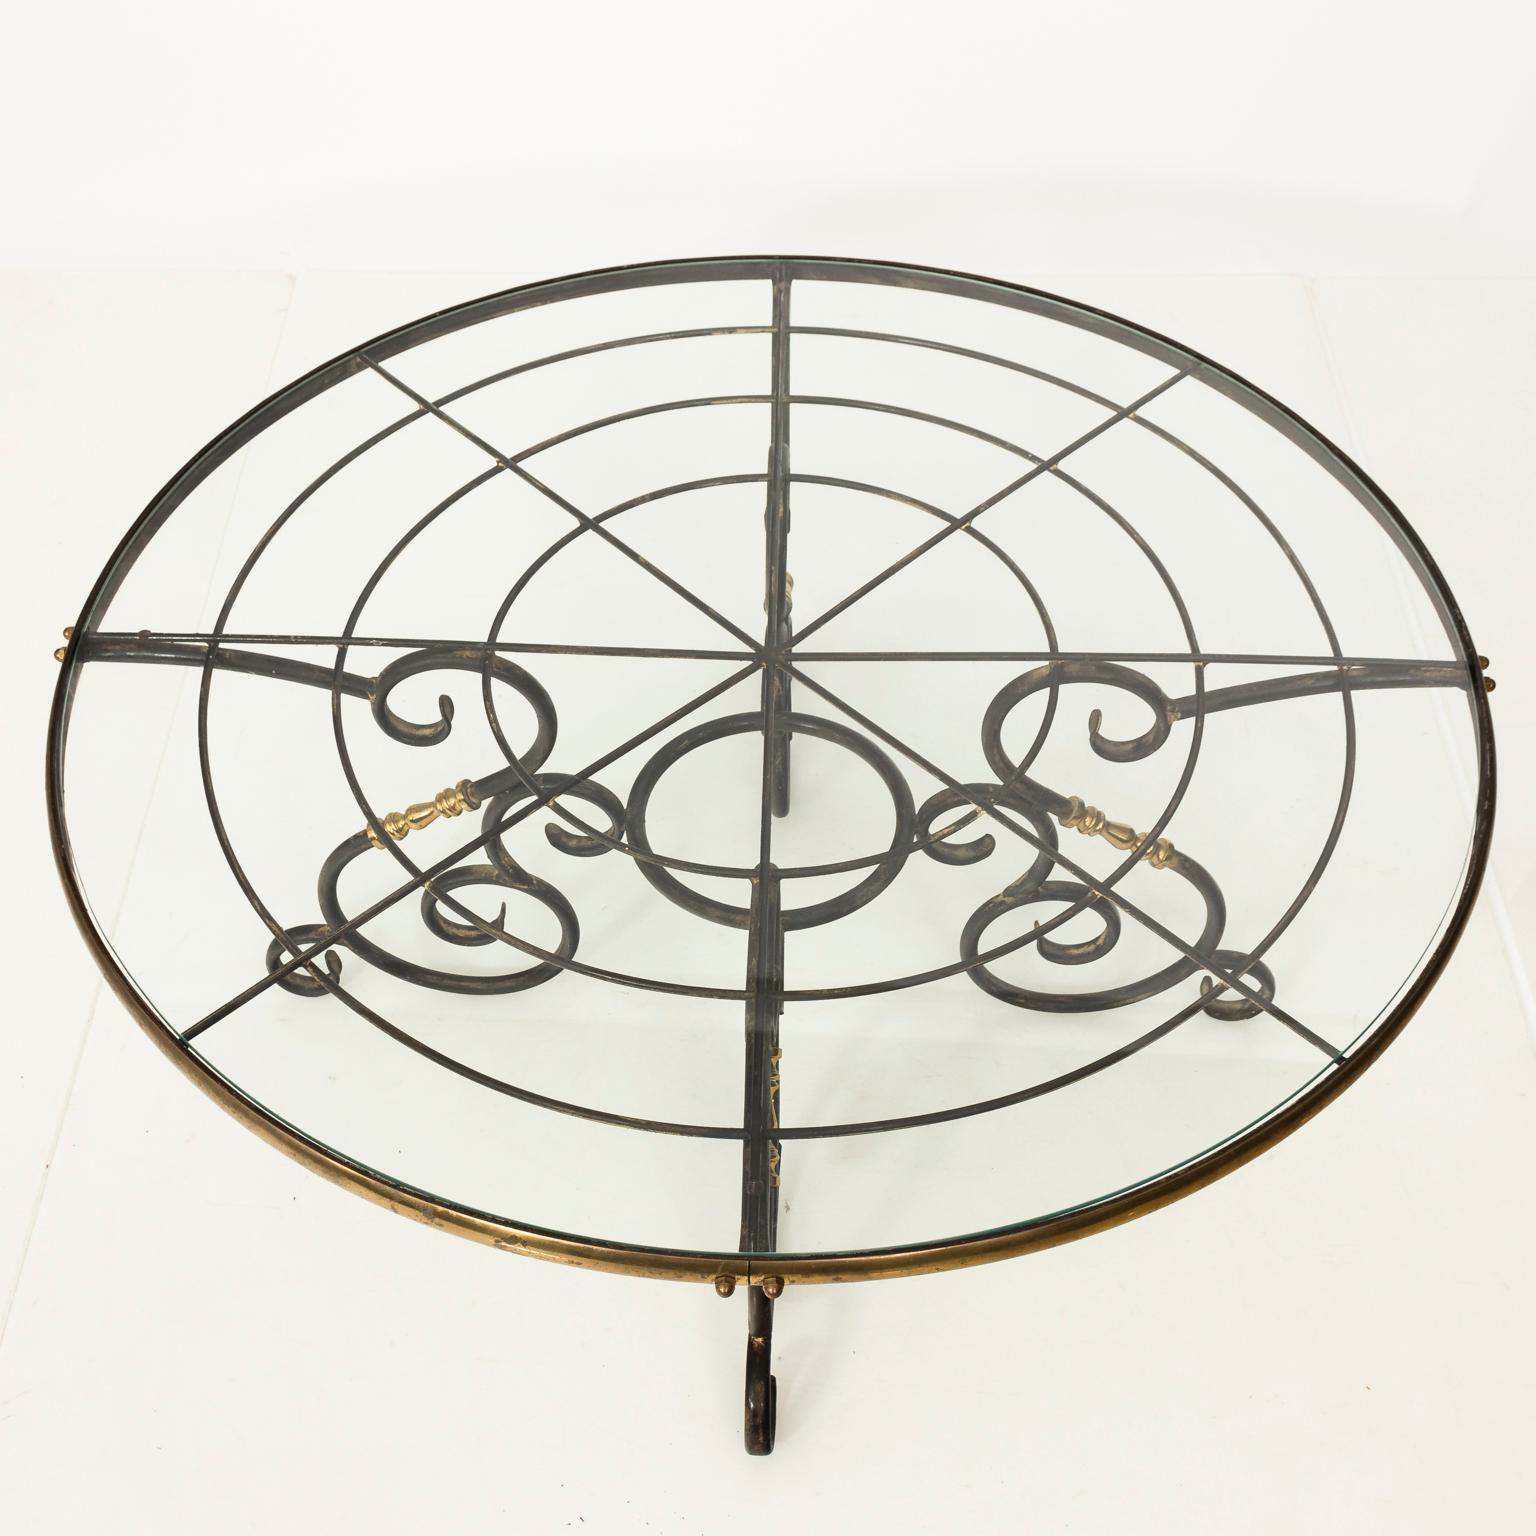 1970s French brass and iron center table with iron S-scroll legs and a glass top.
 